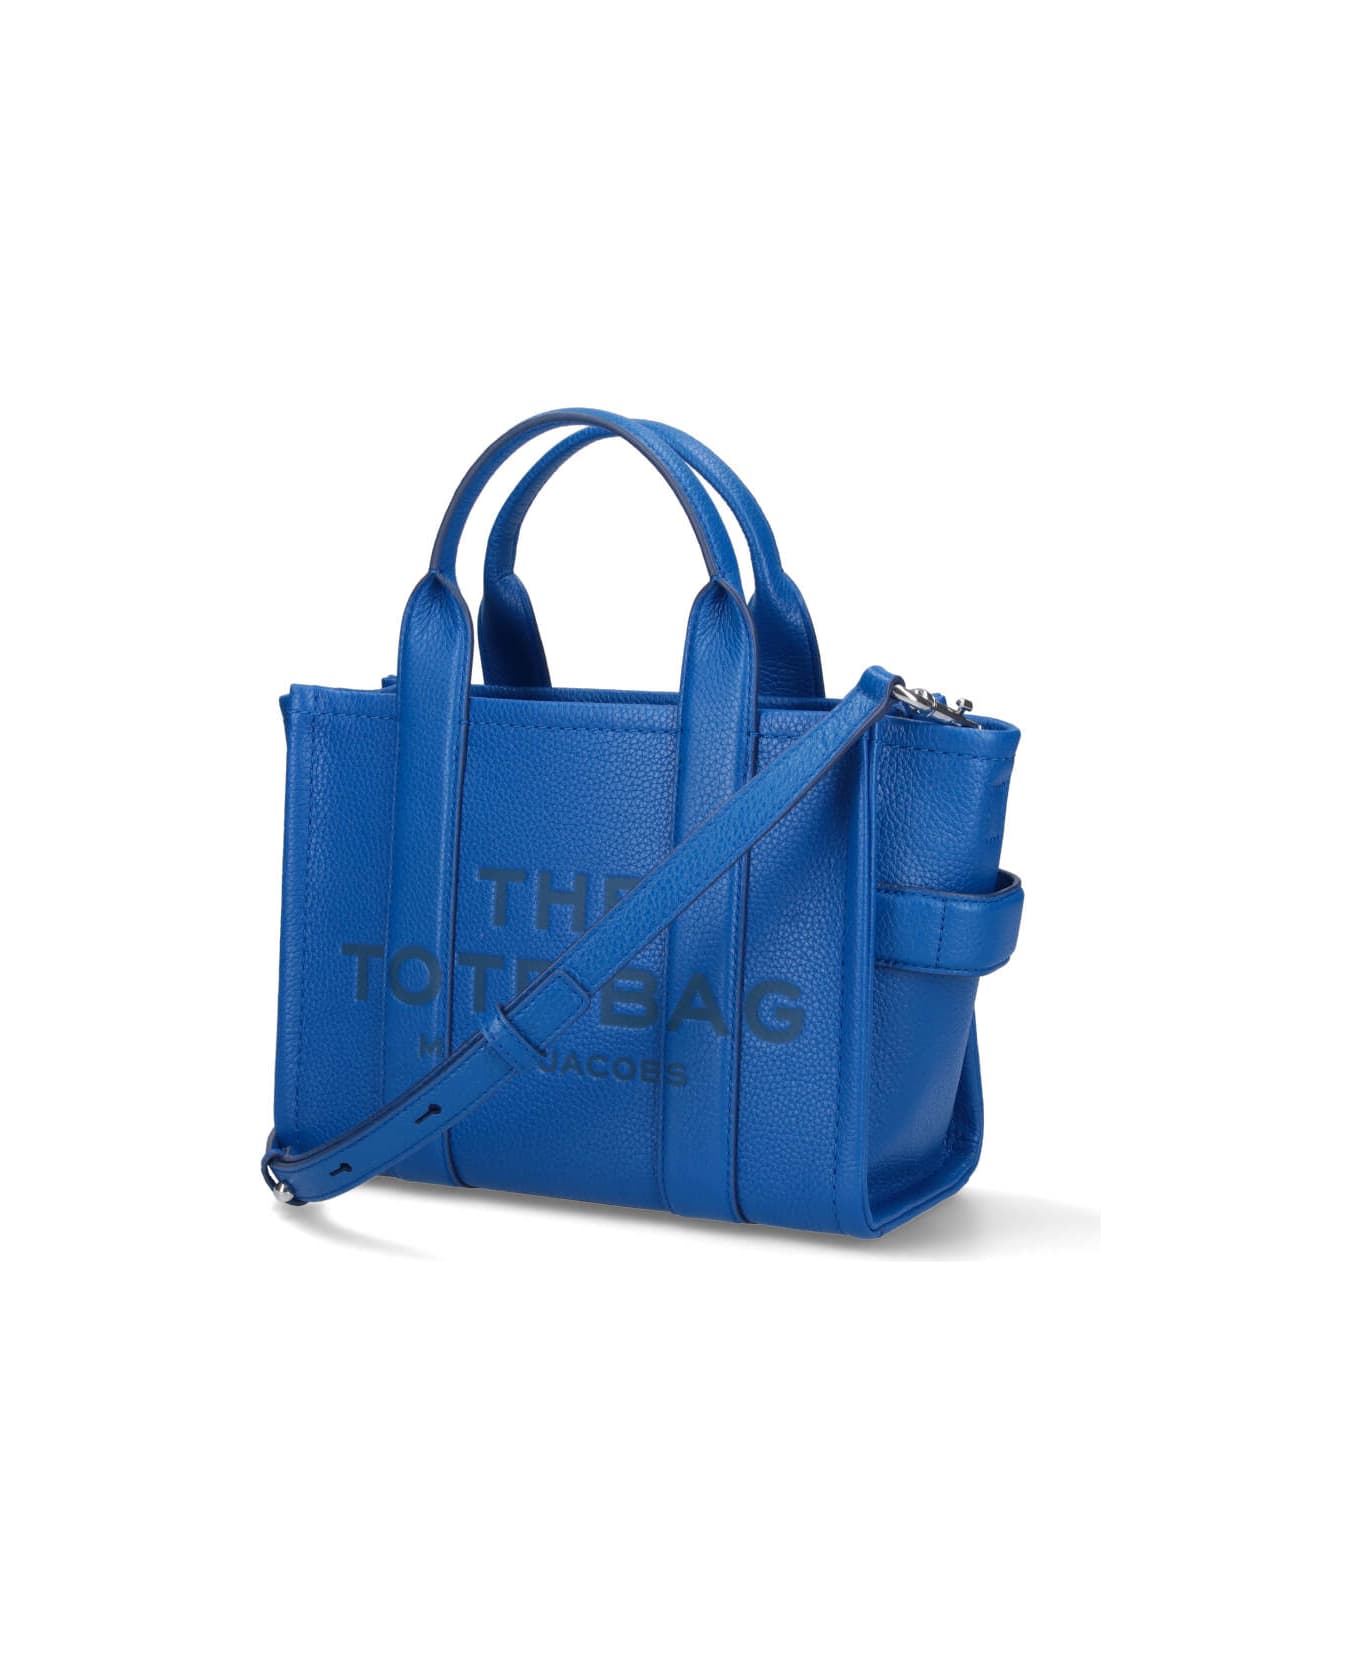 Marc Jacobs The Tote Bag Small - Blue